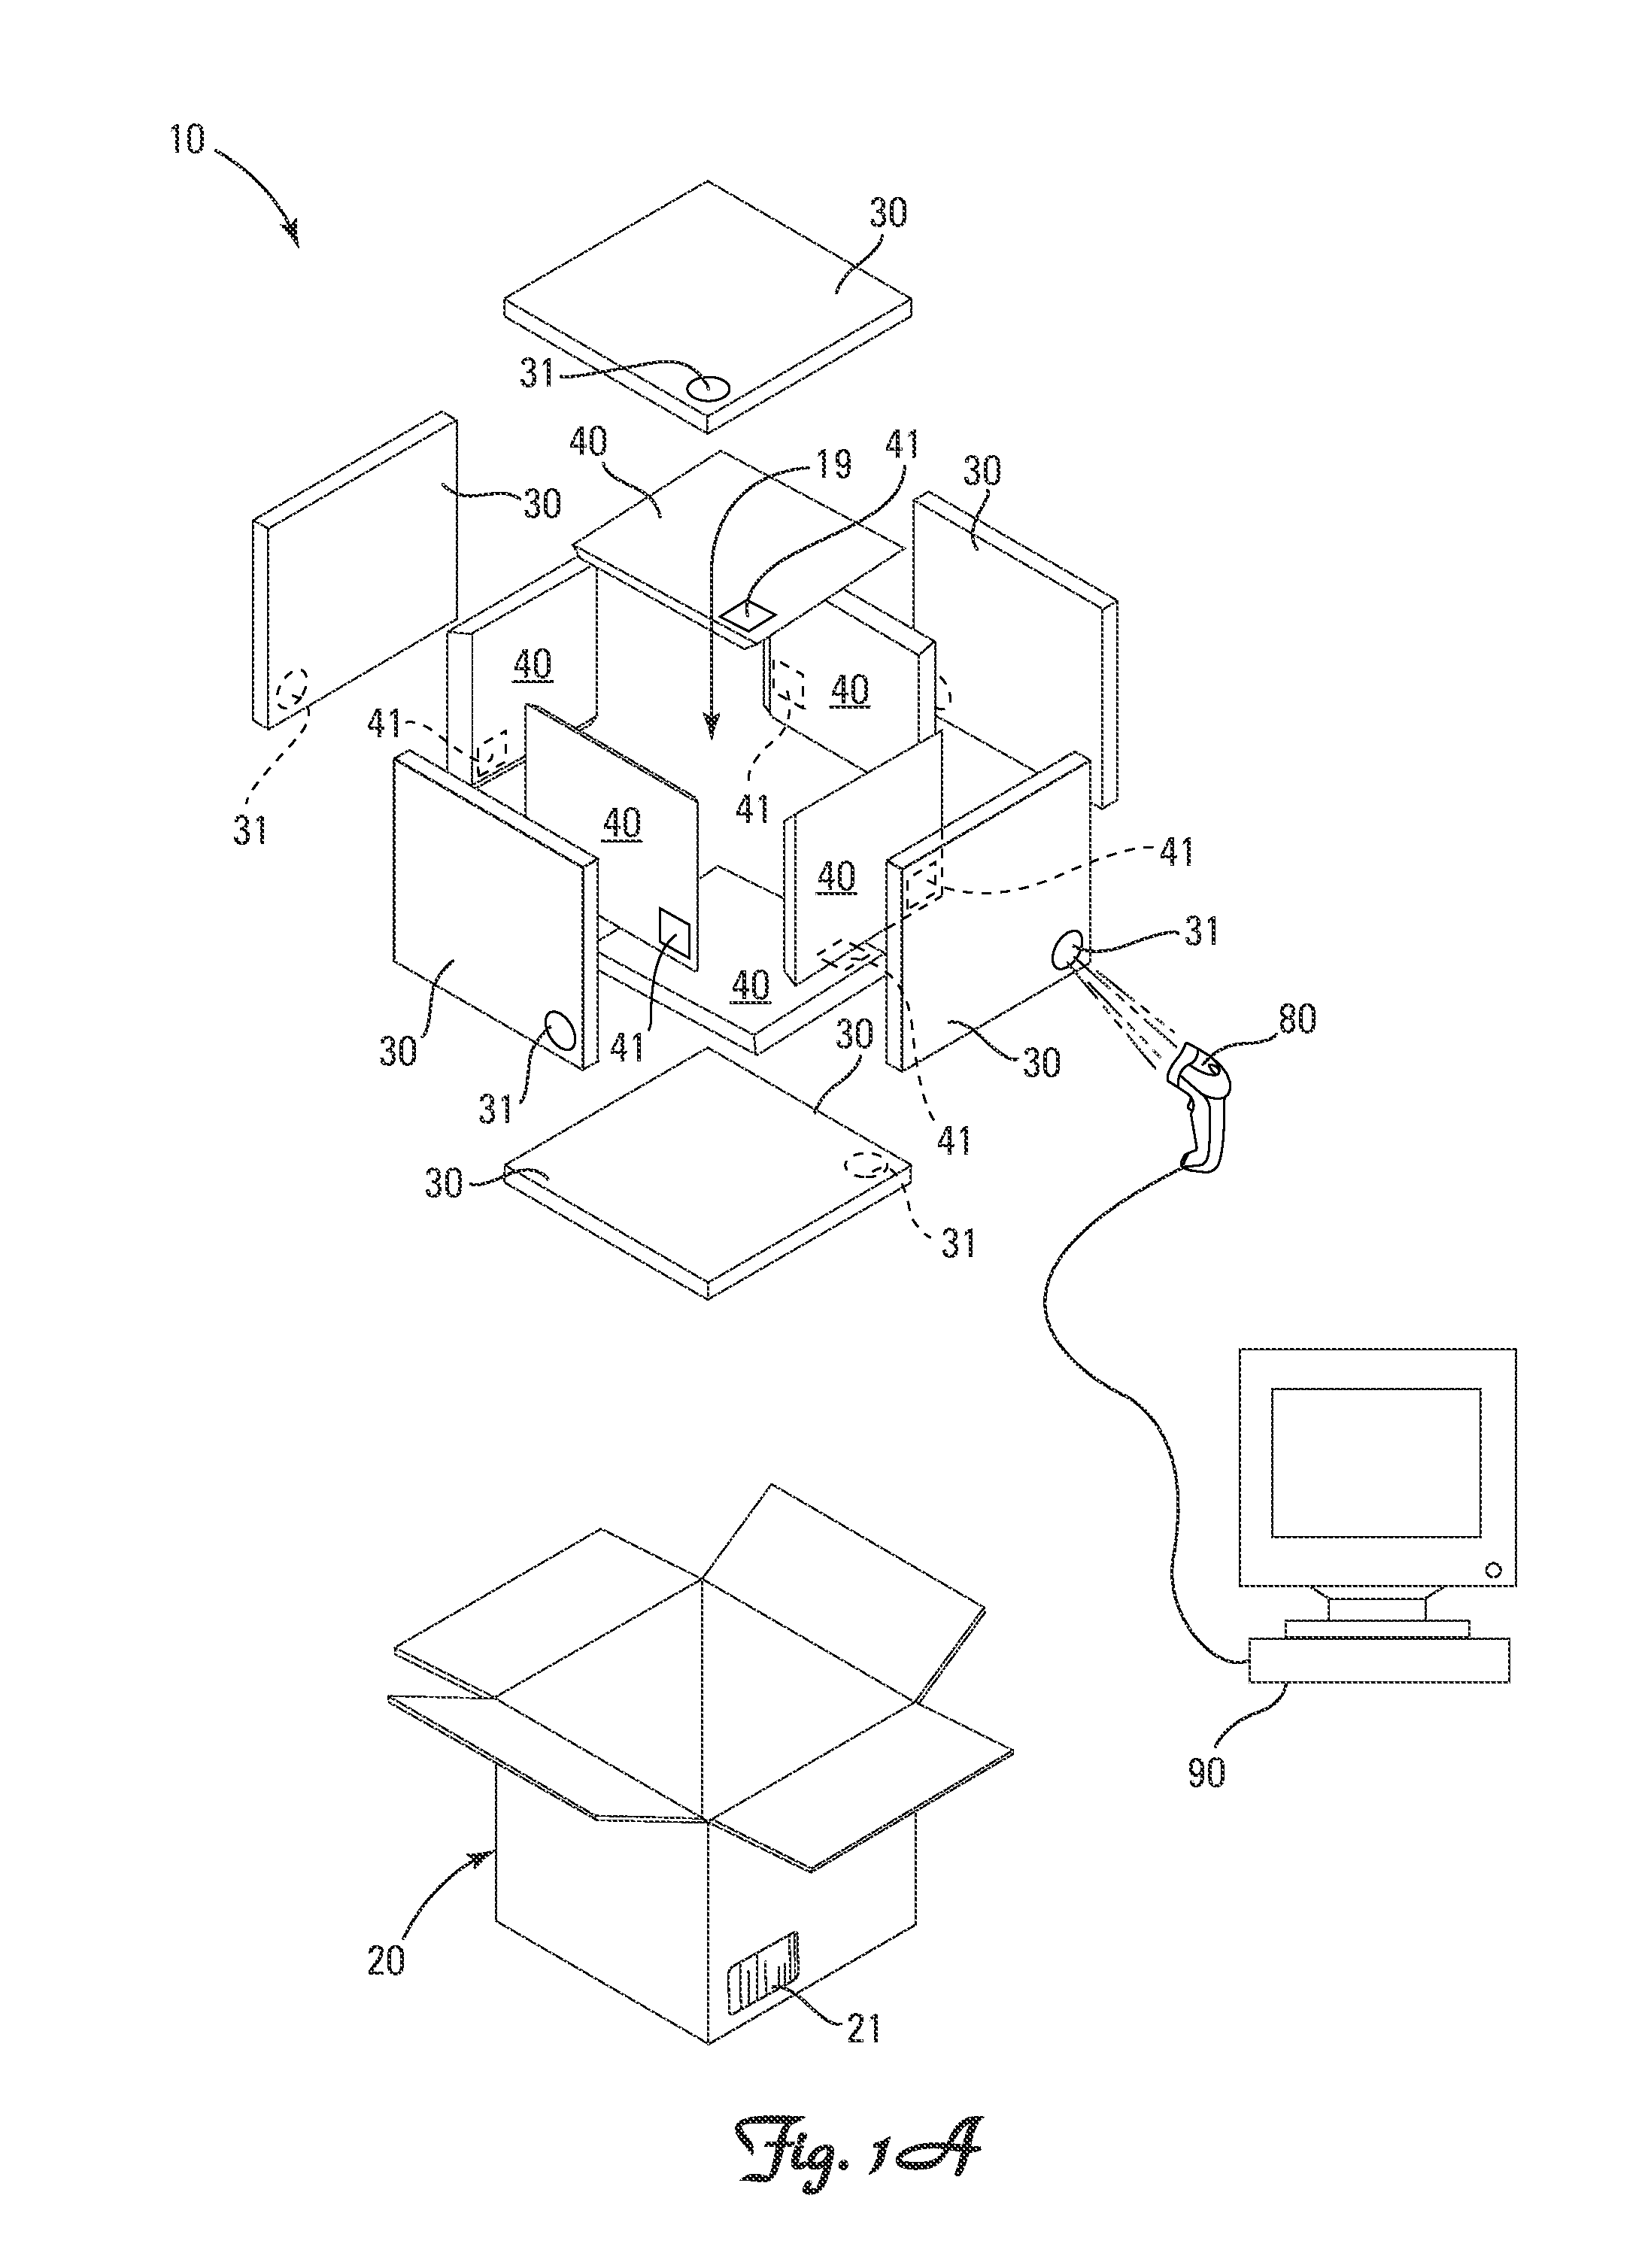 Scheduled component retirement system and method for shipping container components